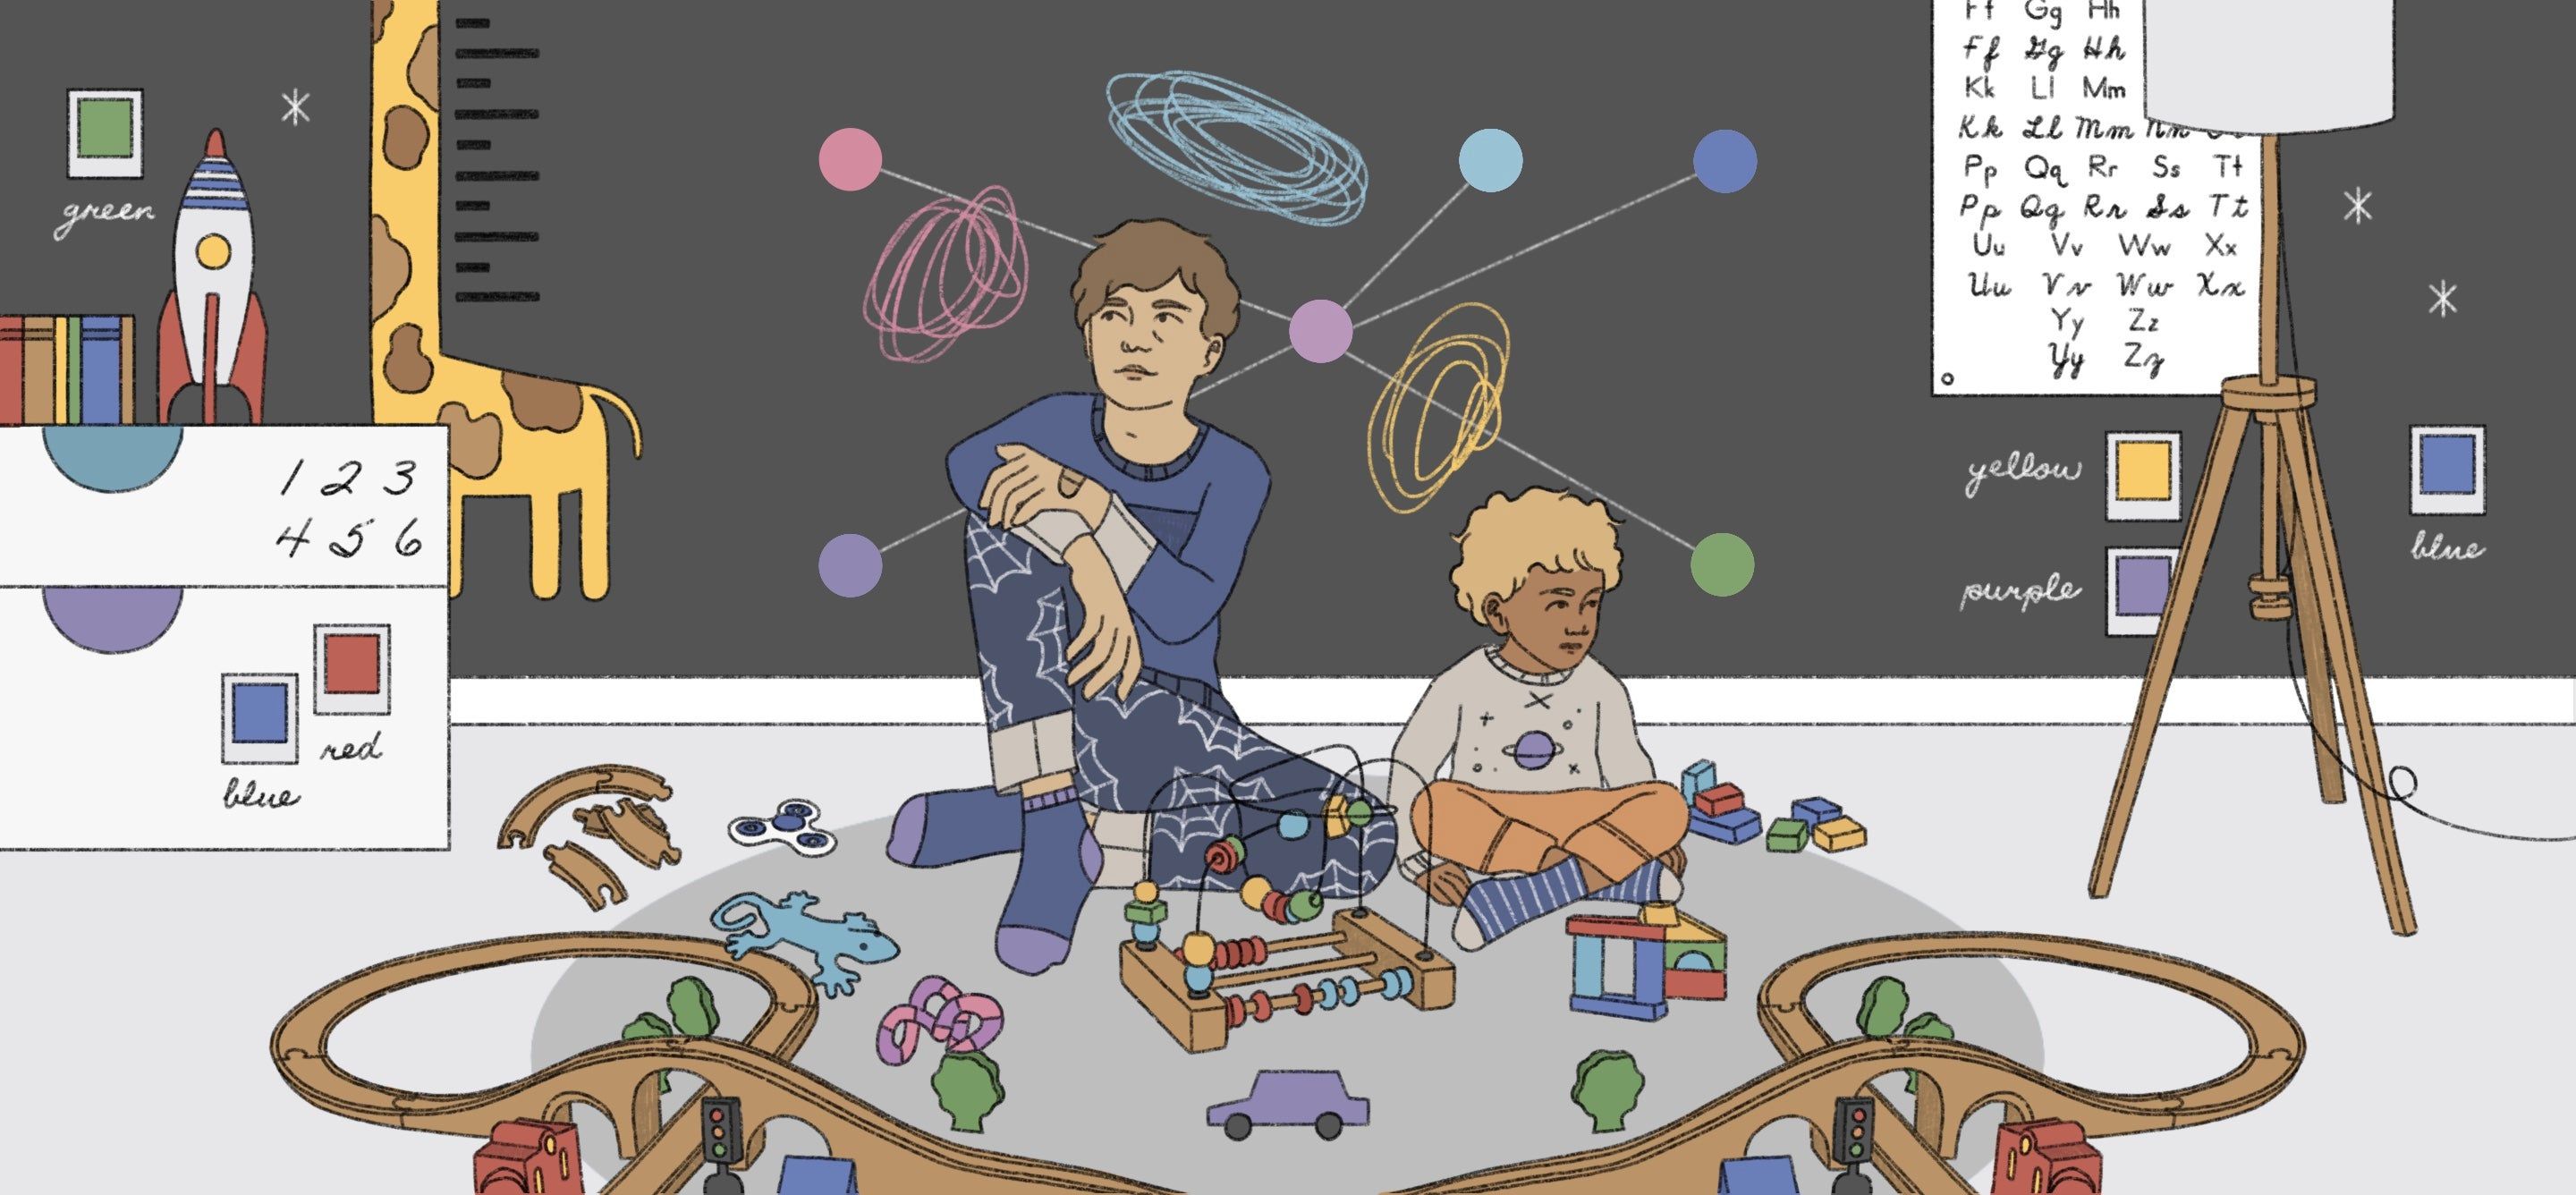 An illustration of two children sitting in a playroom surrounded by various toys and shapes.